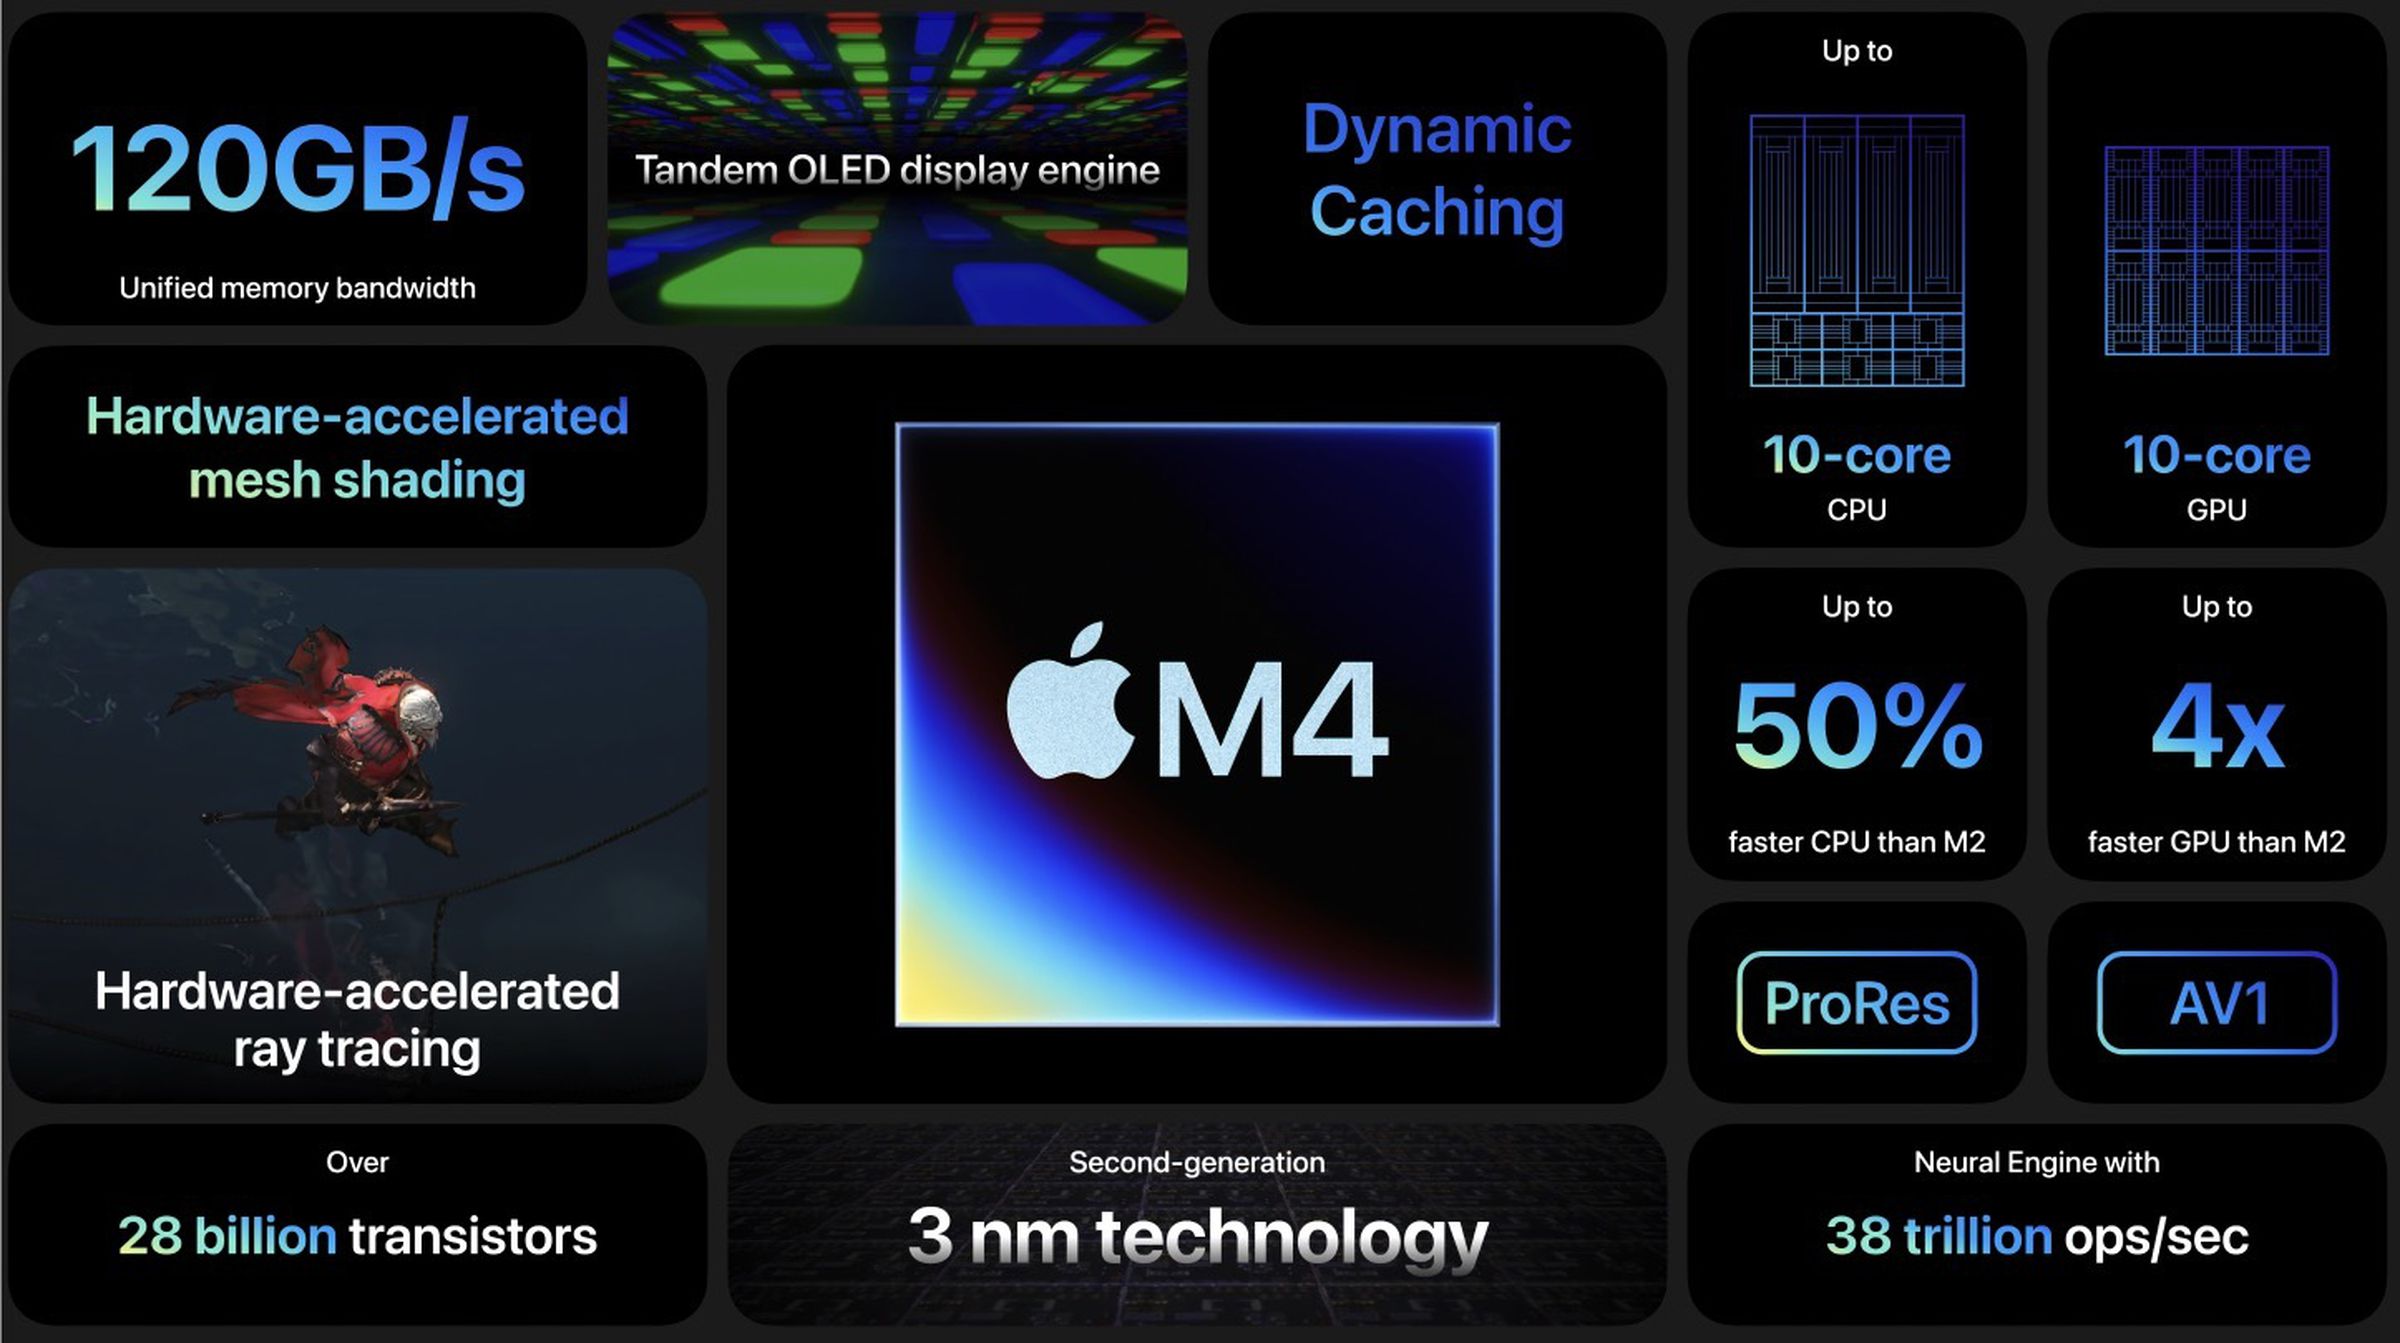 Next-gen M4 chips start arriving in Apple devices this year